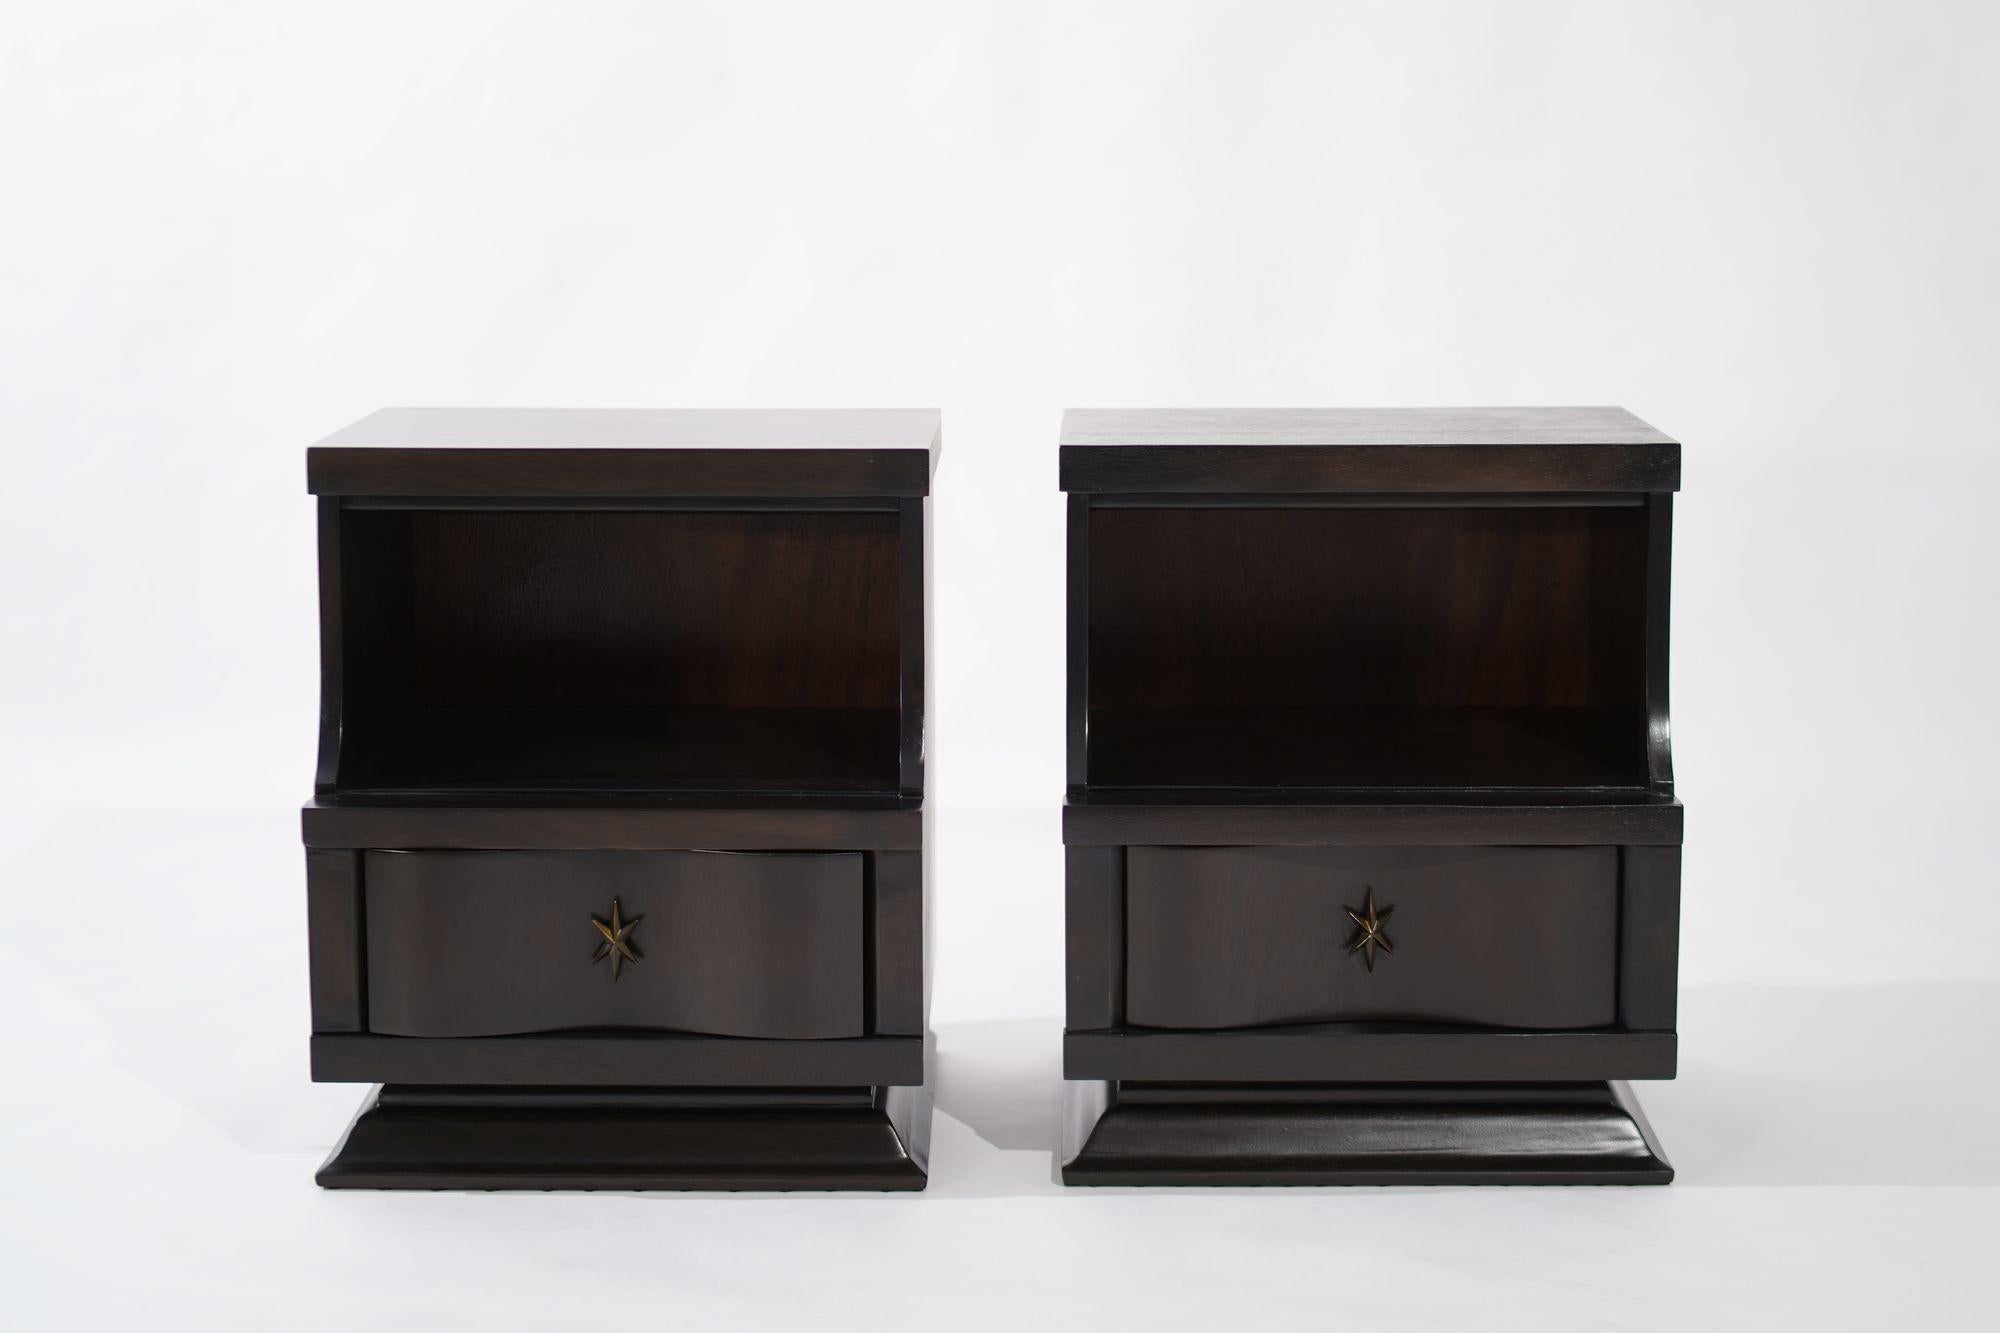 Elevate your bedroom aesthetic with Stamford Modern's impeccably restored pair of 1950s nightstands, exquisitely crafted from mahogany and transformed with a sleek ebony finish. The deep, rich tones of the wood, combined with meticulous restoration,